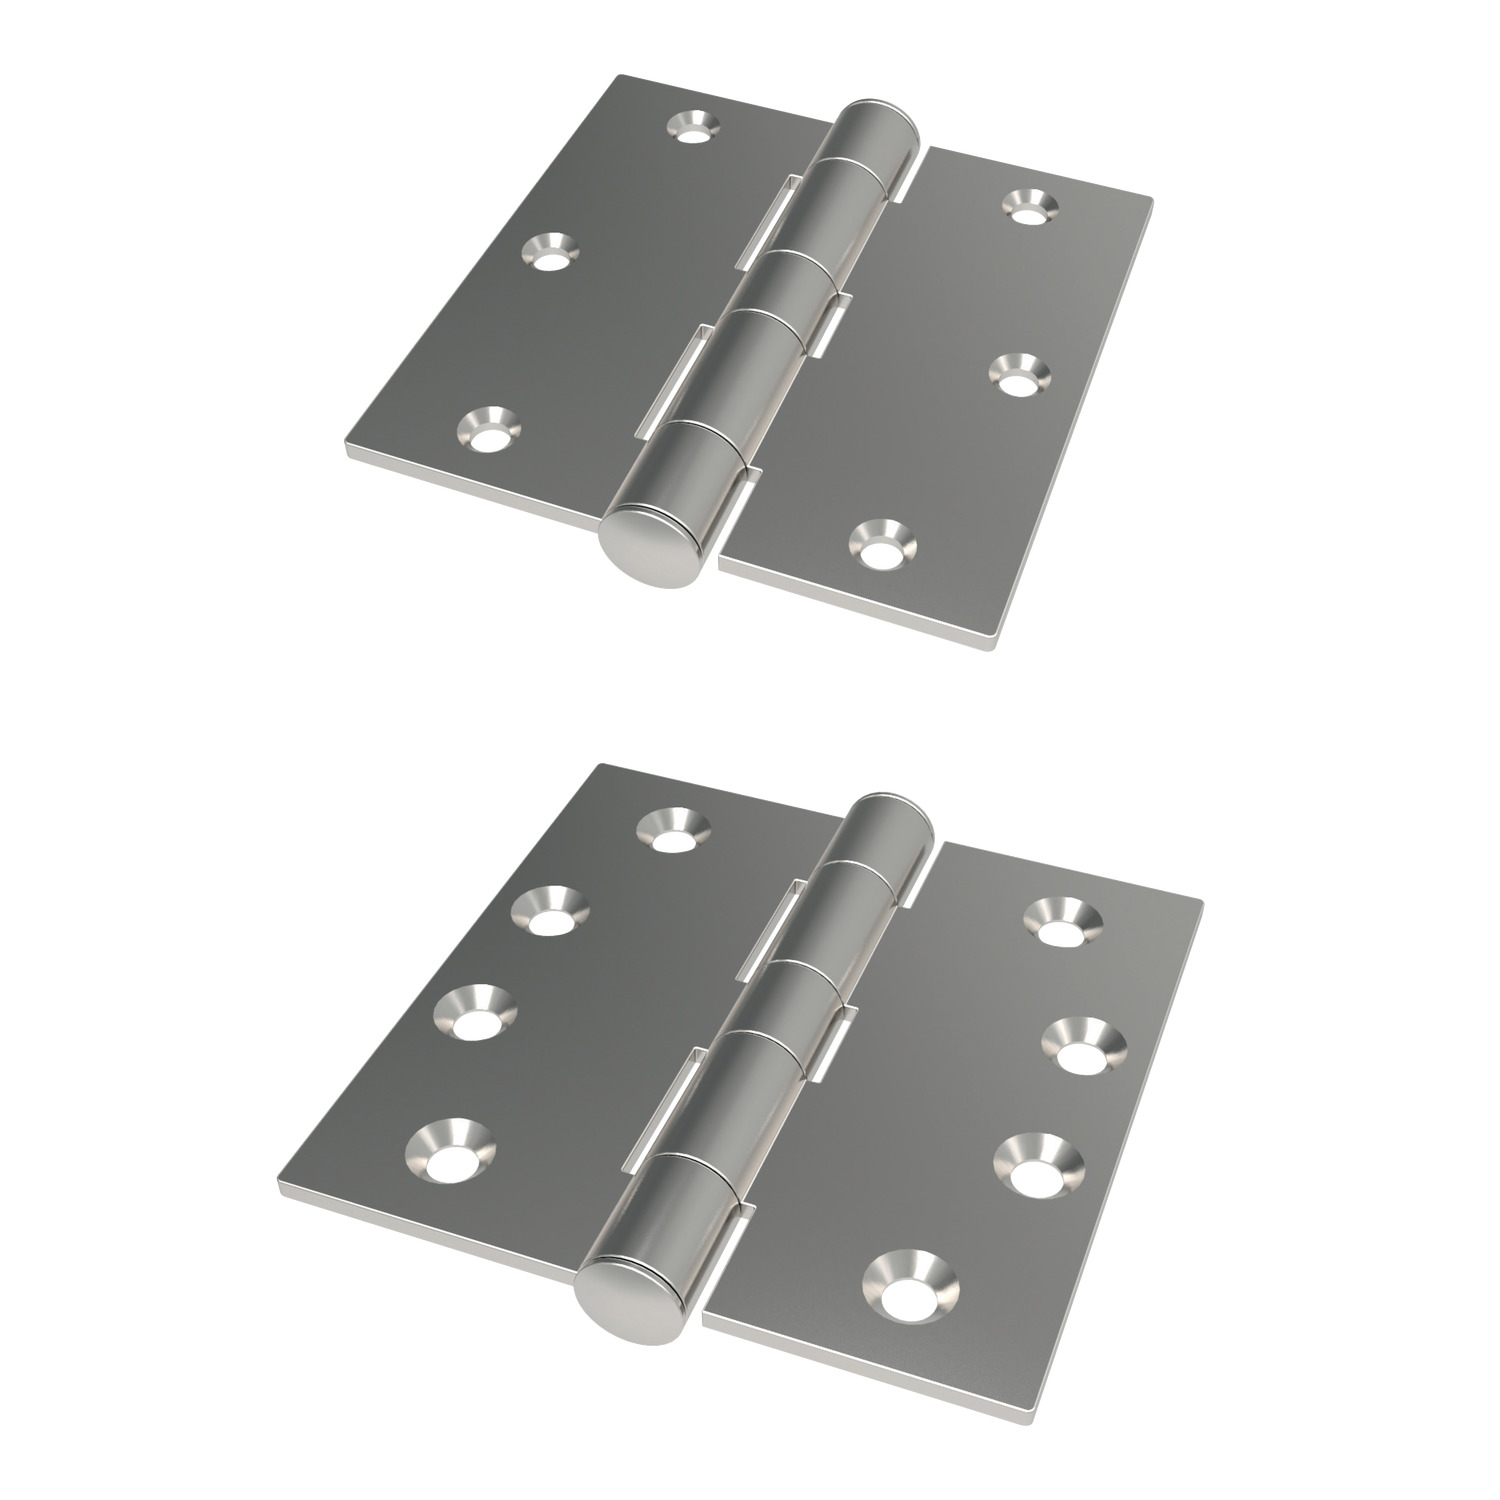 S0740.AC0011 Surface Mount - Leaf Hinges Screw mount - Stainless steel. 114,3 x 114,3. Also known as 52340.W0011